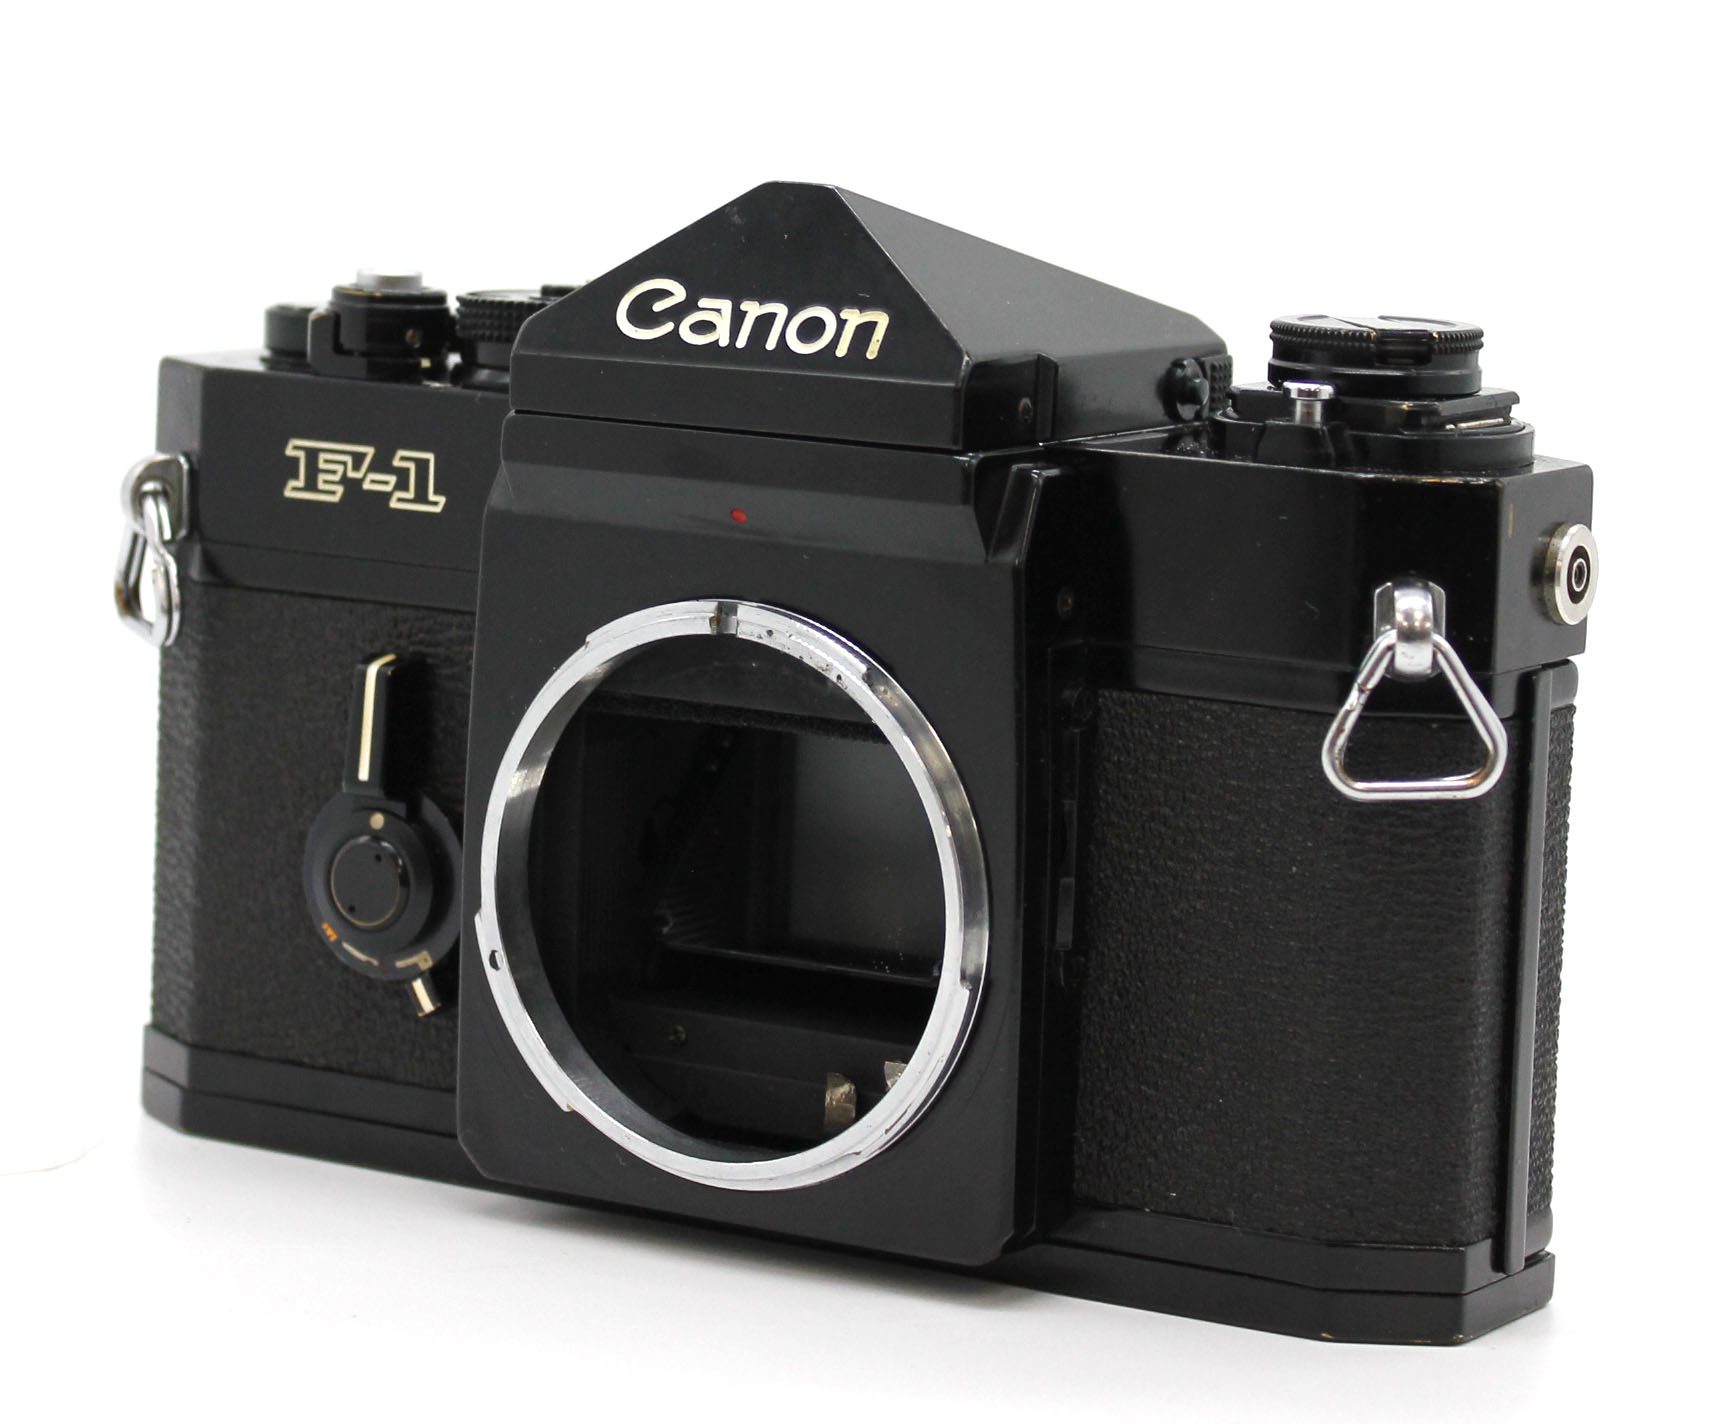  Canon F-1 35mm SLR Film Camera with FD 50mm F/1.4 S.S.C. Lens from Japan Photo 1